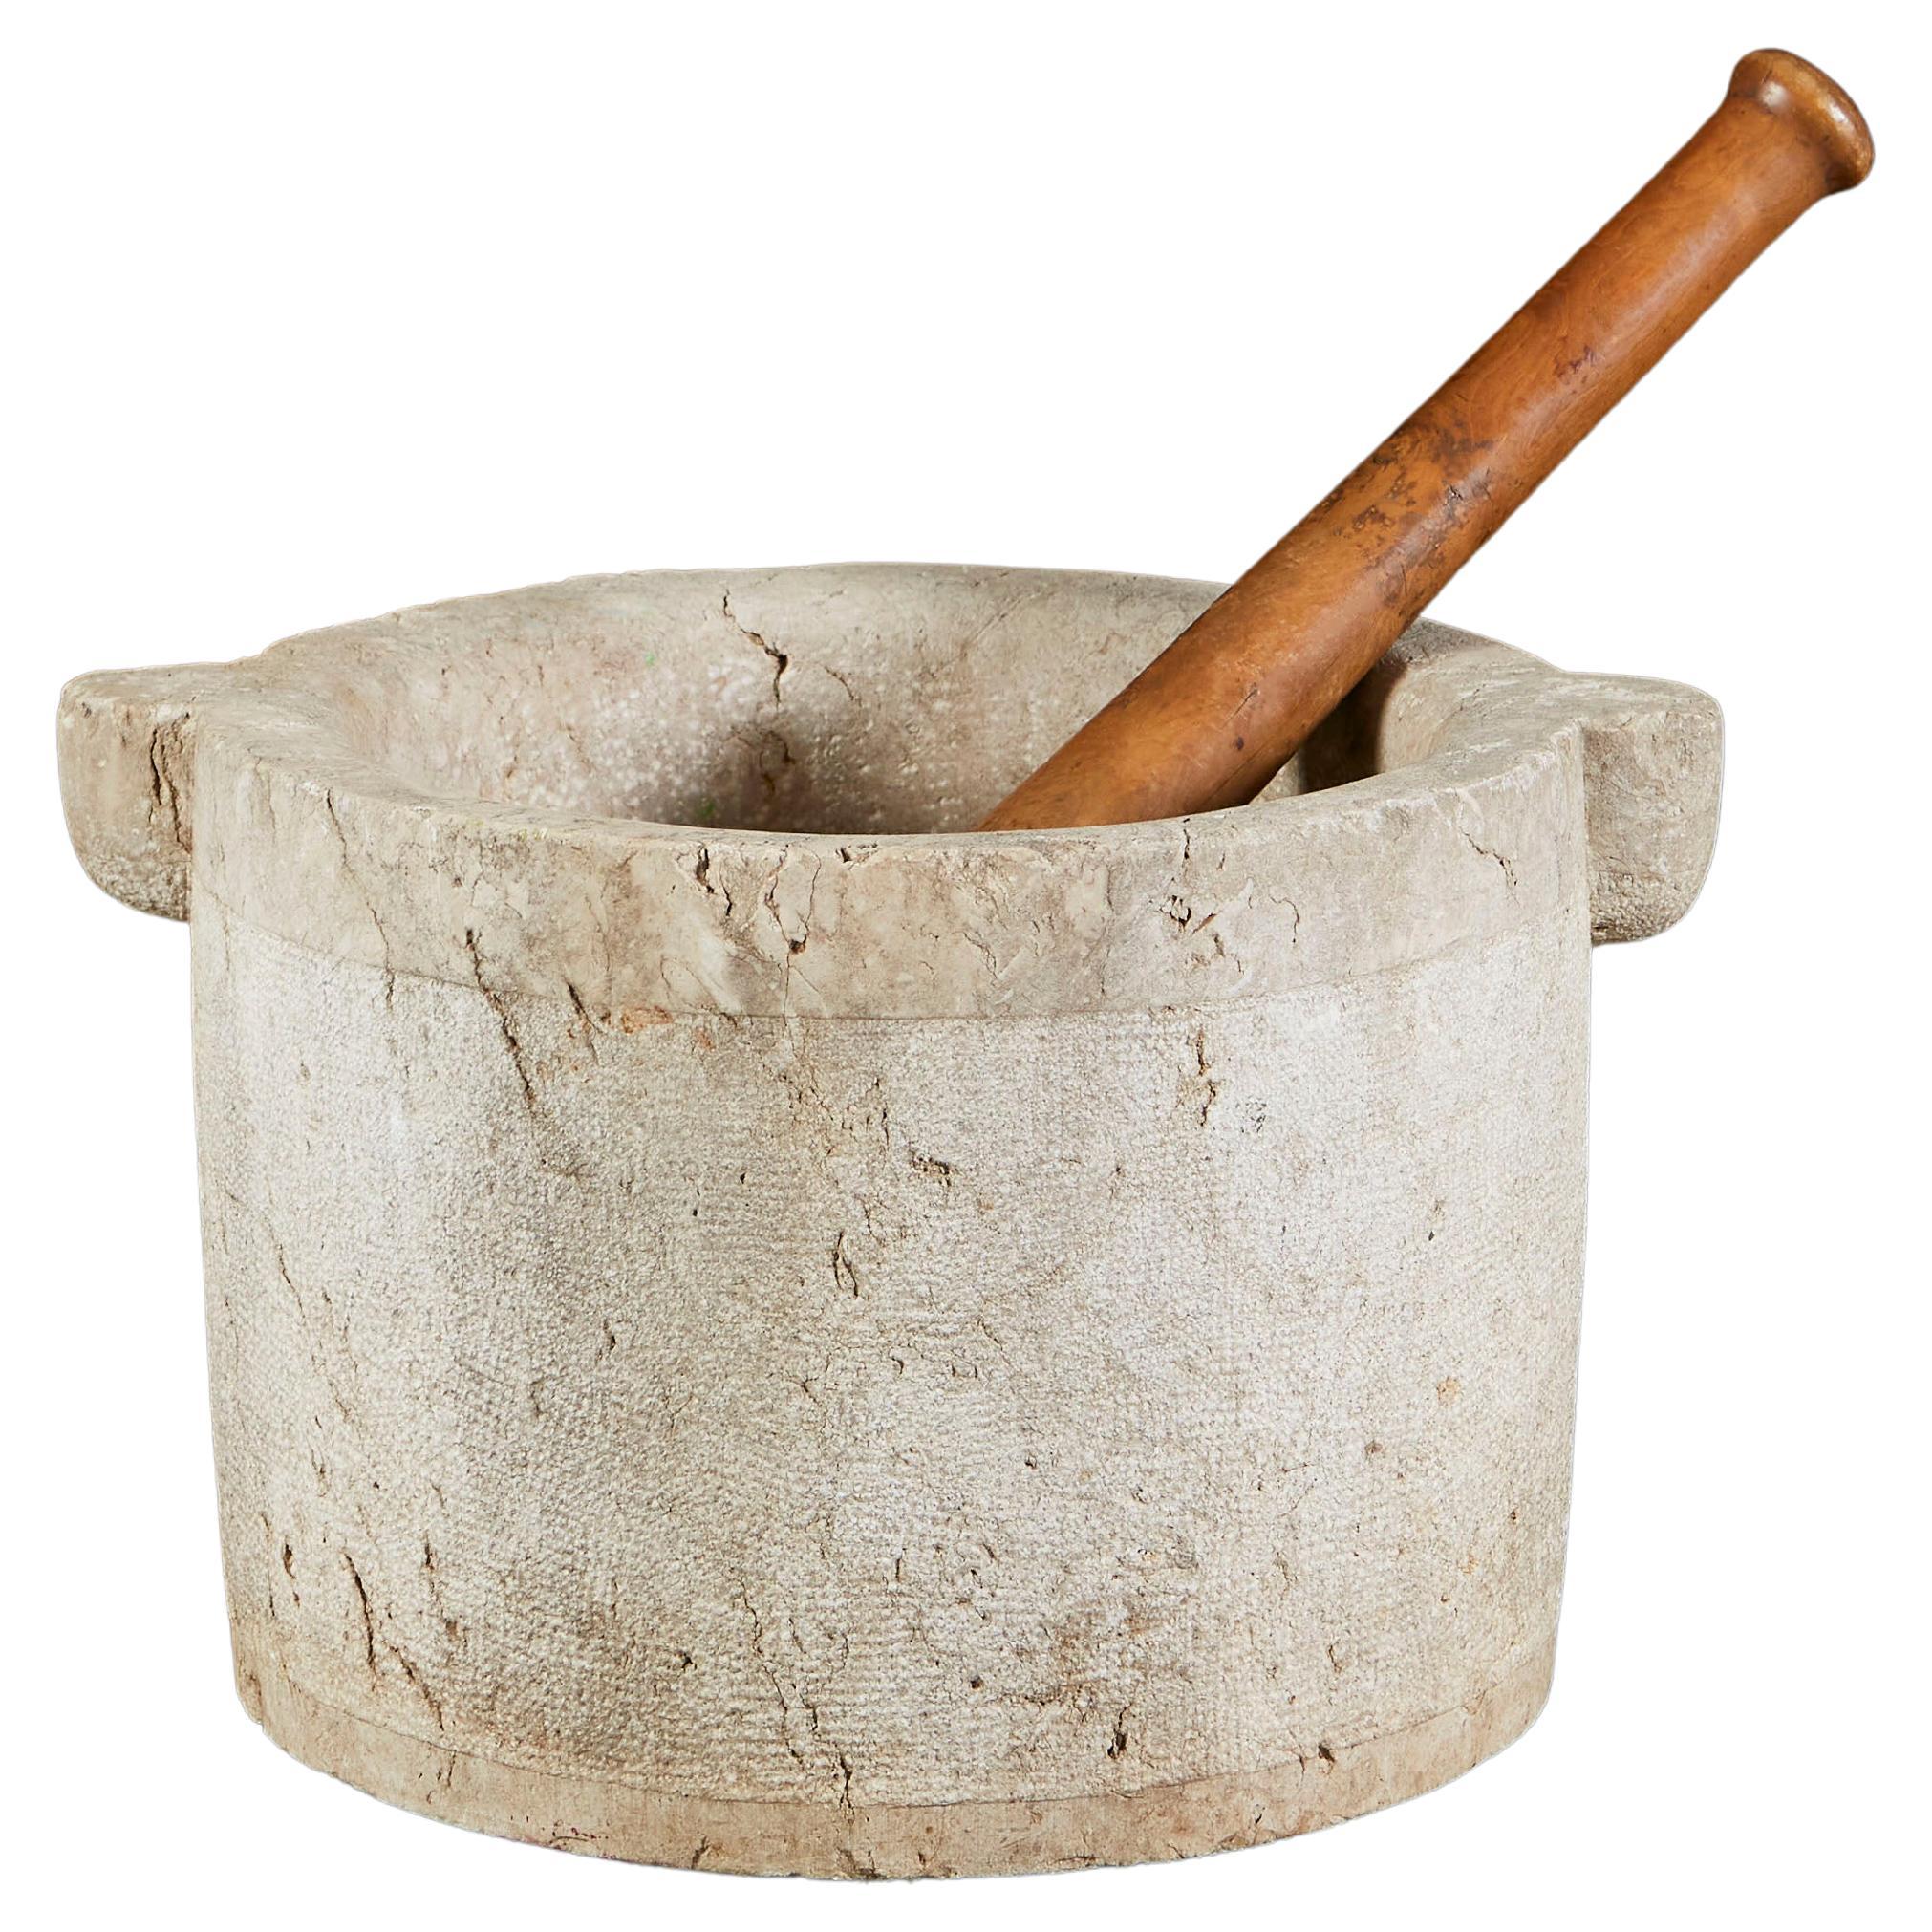 Overscale Stone Pestle and Mortar